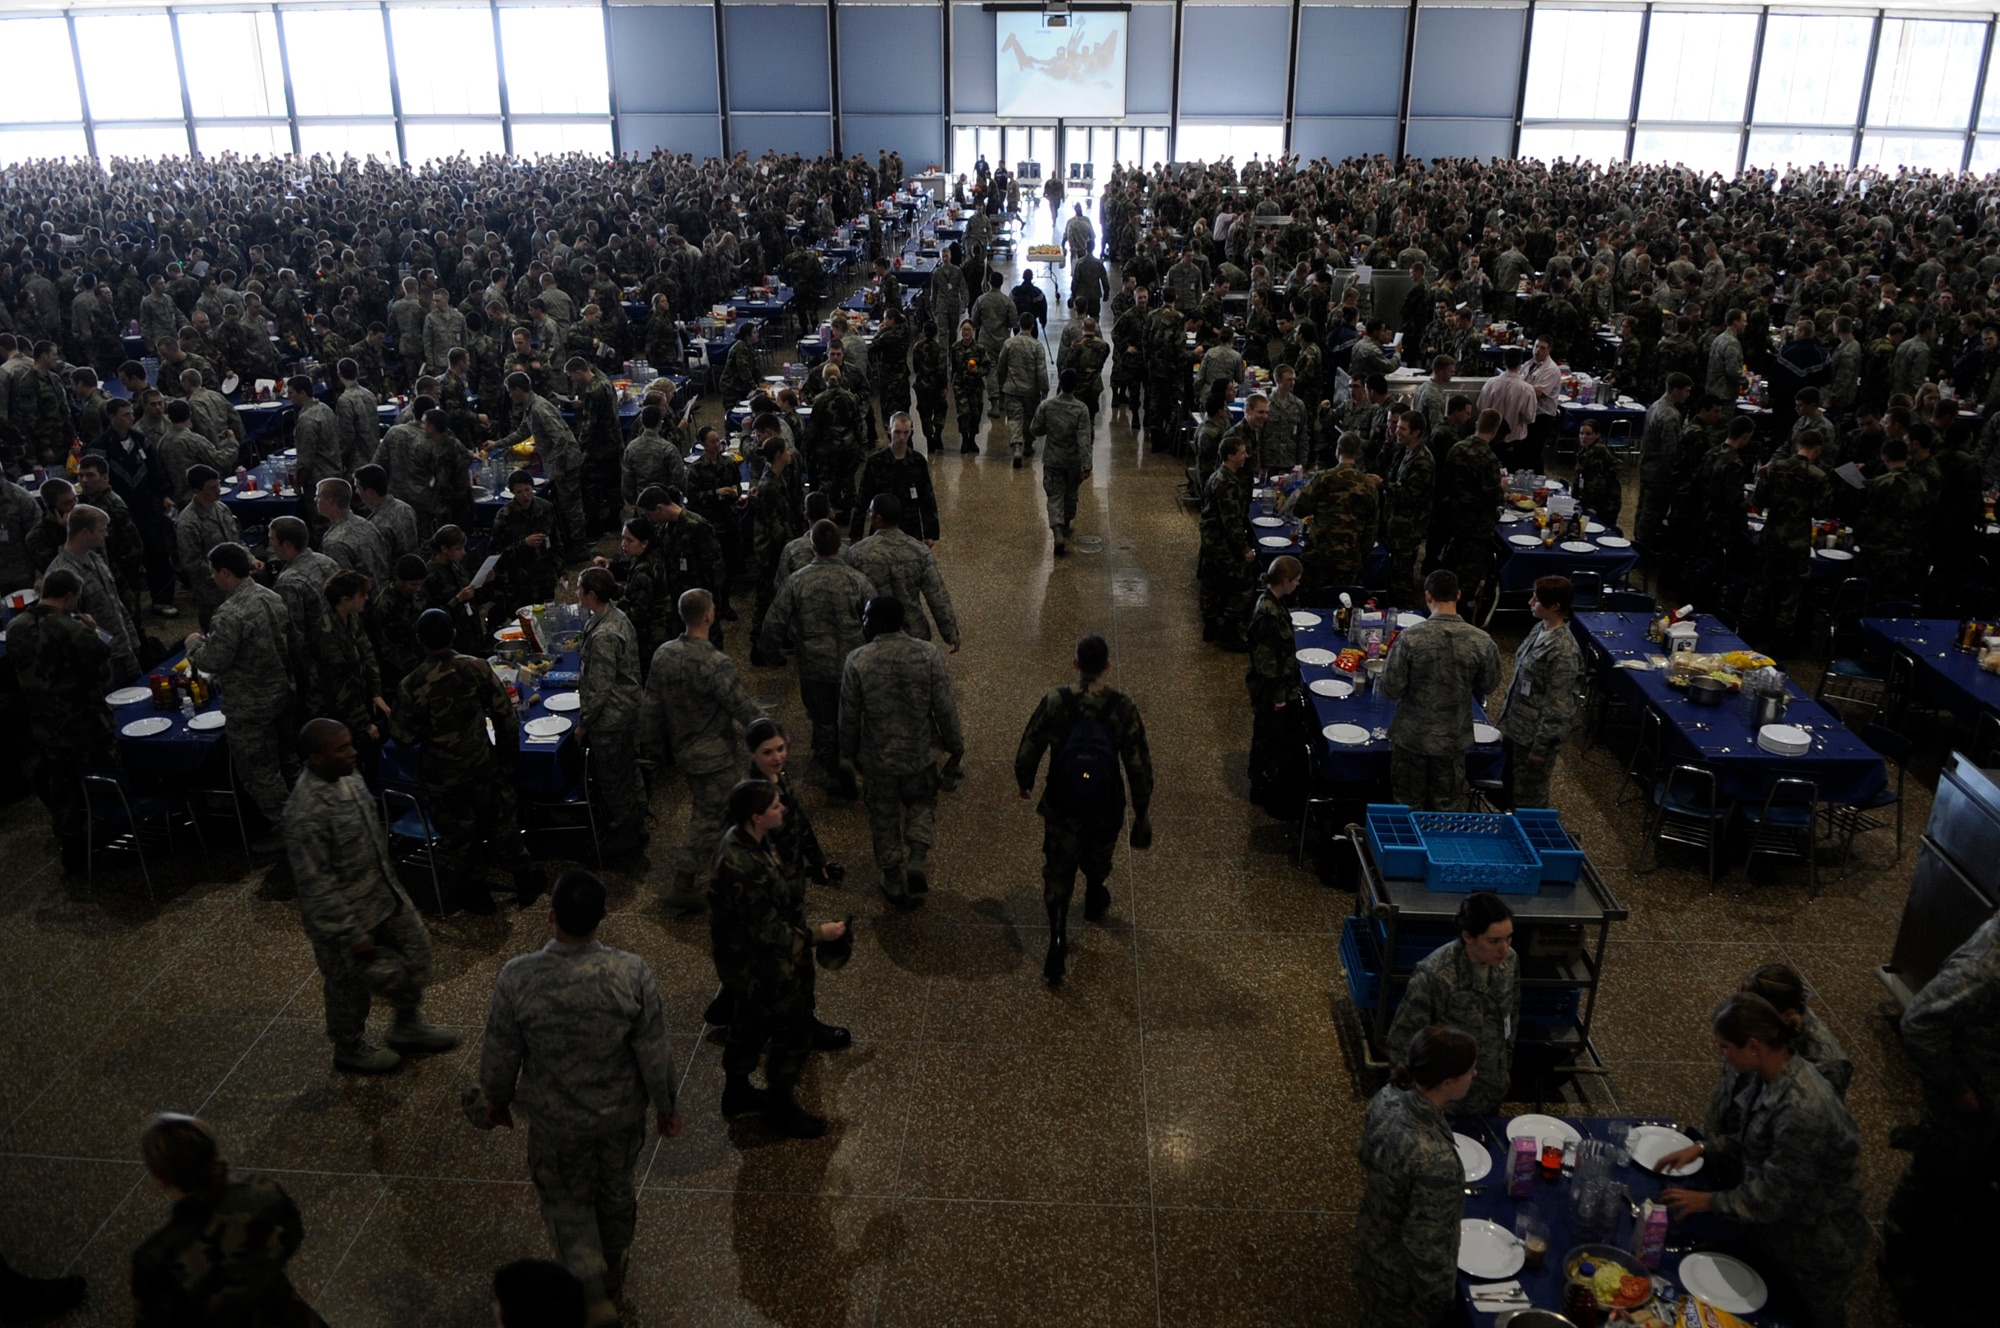 Cadets stand beside their chairs Jan. 23 as they wait for the rest of the cadets to enter Mitchell Hall Cadet Dining Facility at the U.S. Air Force Academy in Colorado Springs, Colo. so they can begin lunch. The dining facility feeds approximately 4450 cadets and sits on 1.75 acres. (U.S Air Force photo/Staff Sgt. Desiree N. Palacios)